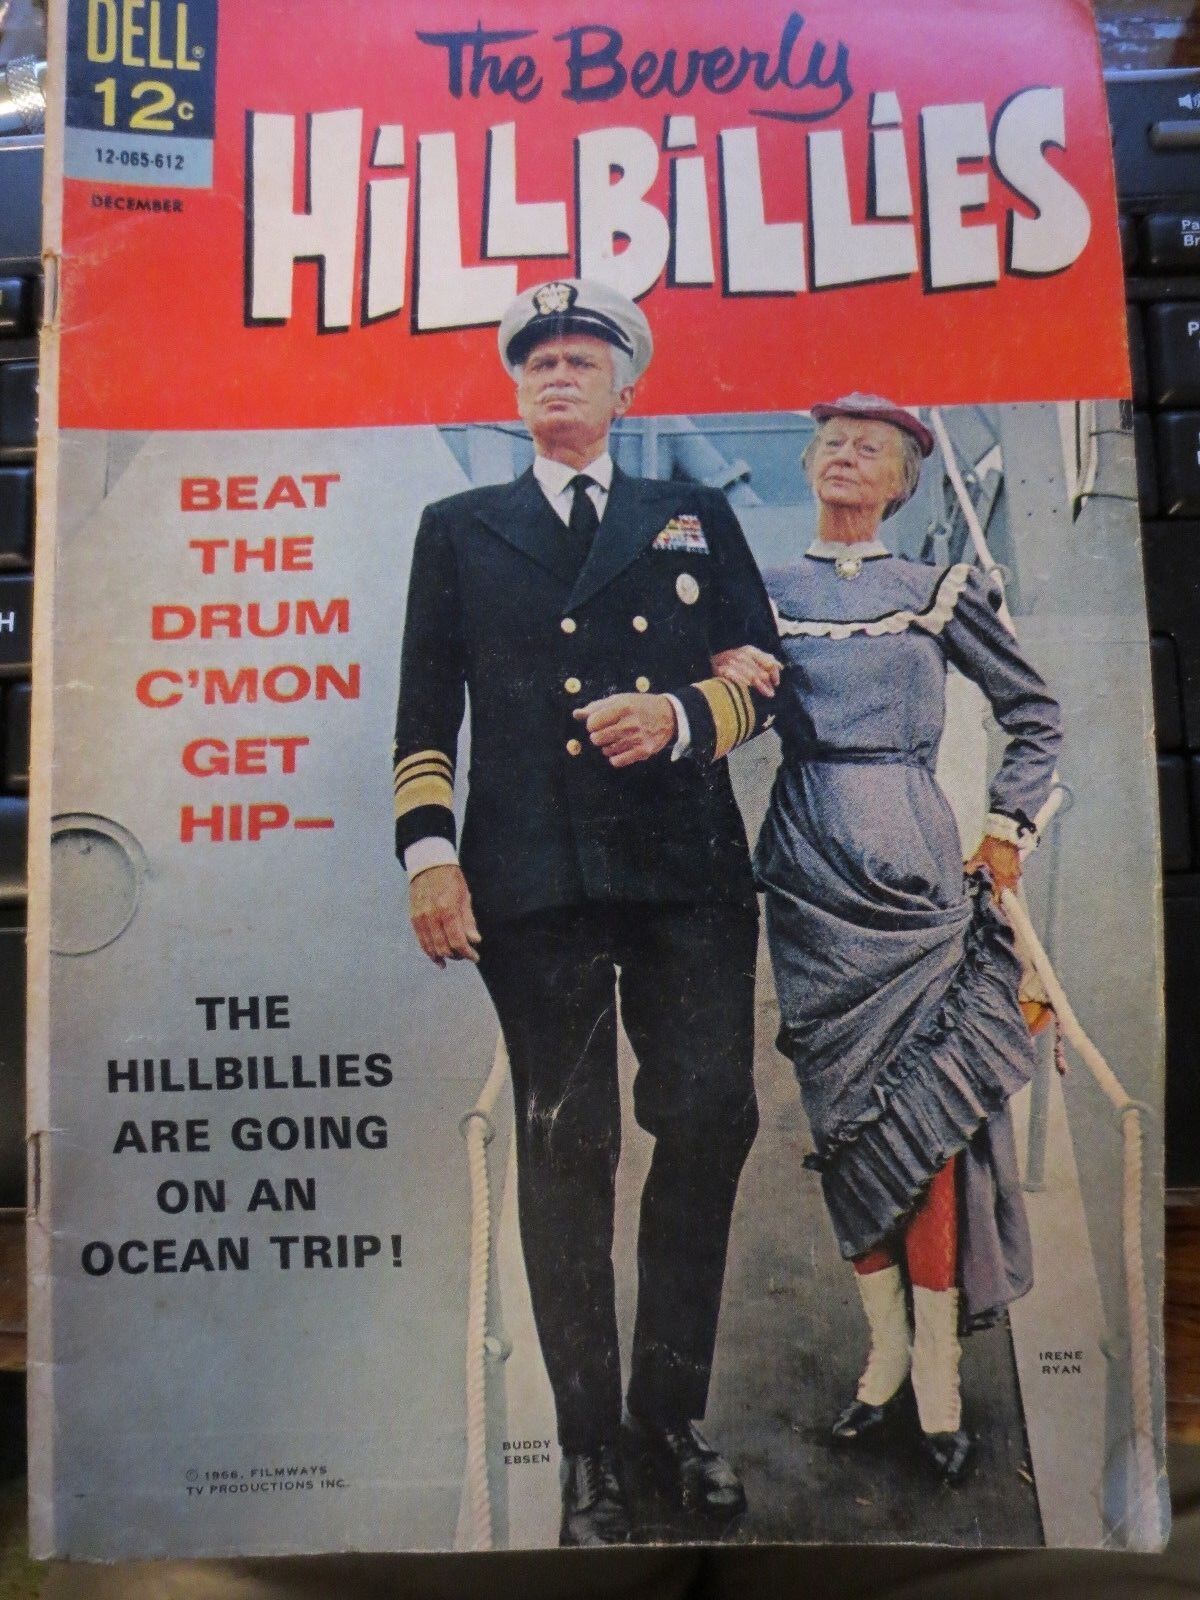 1966 THE BEVERLY HILLBILLIES COMIC BOOK BY DELL # 15